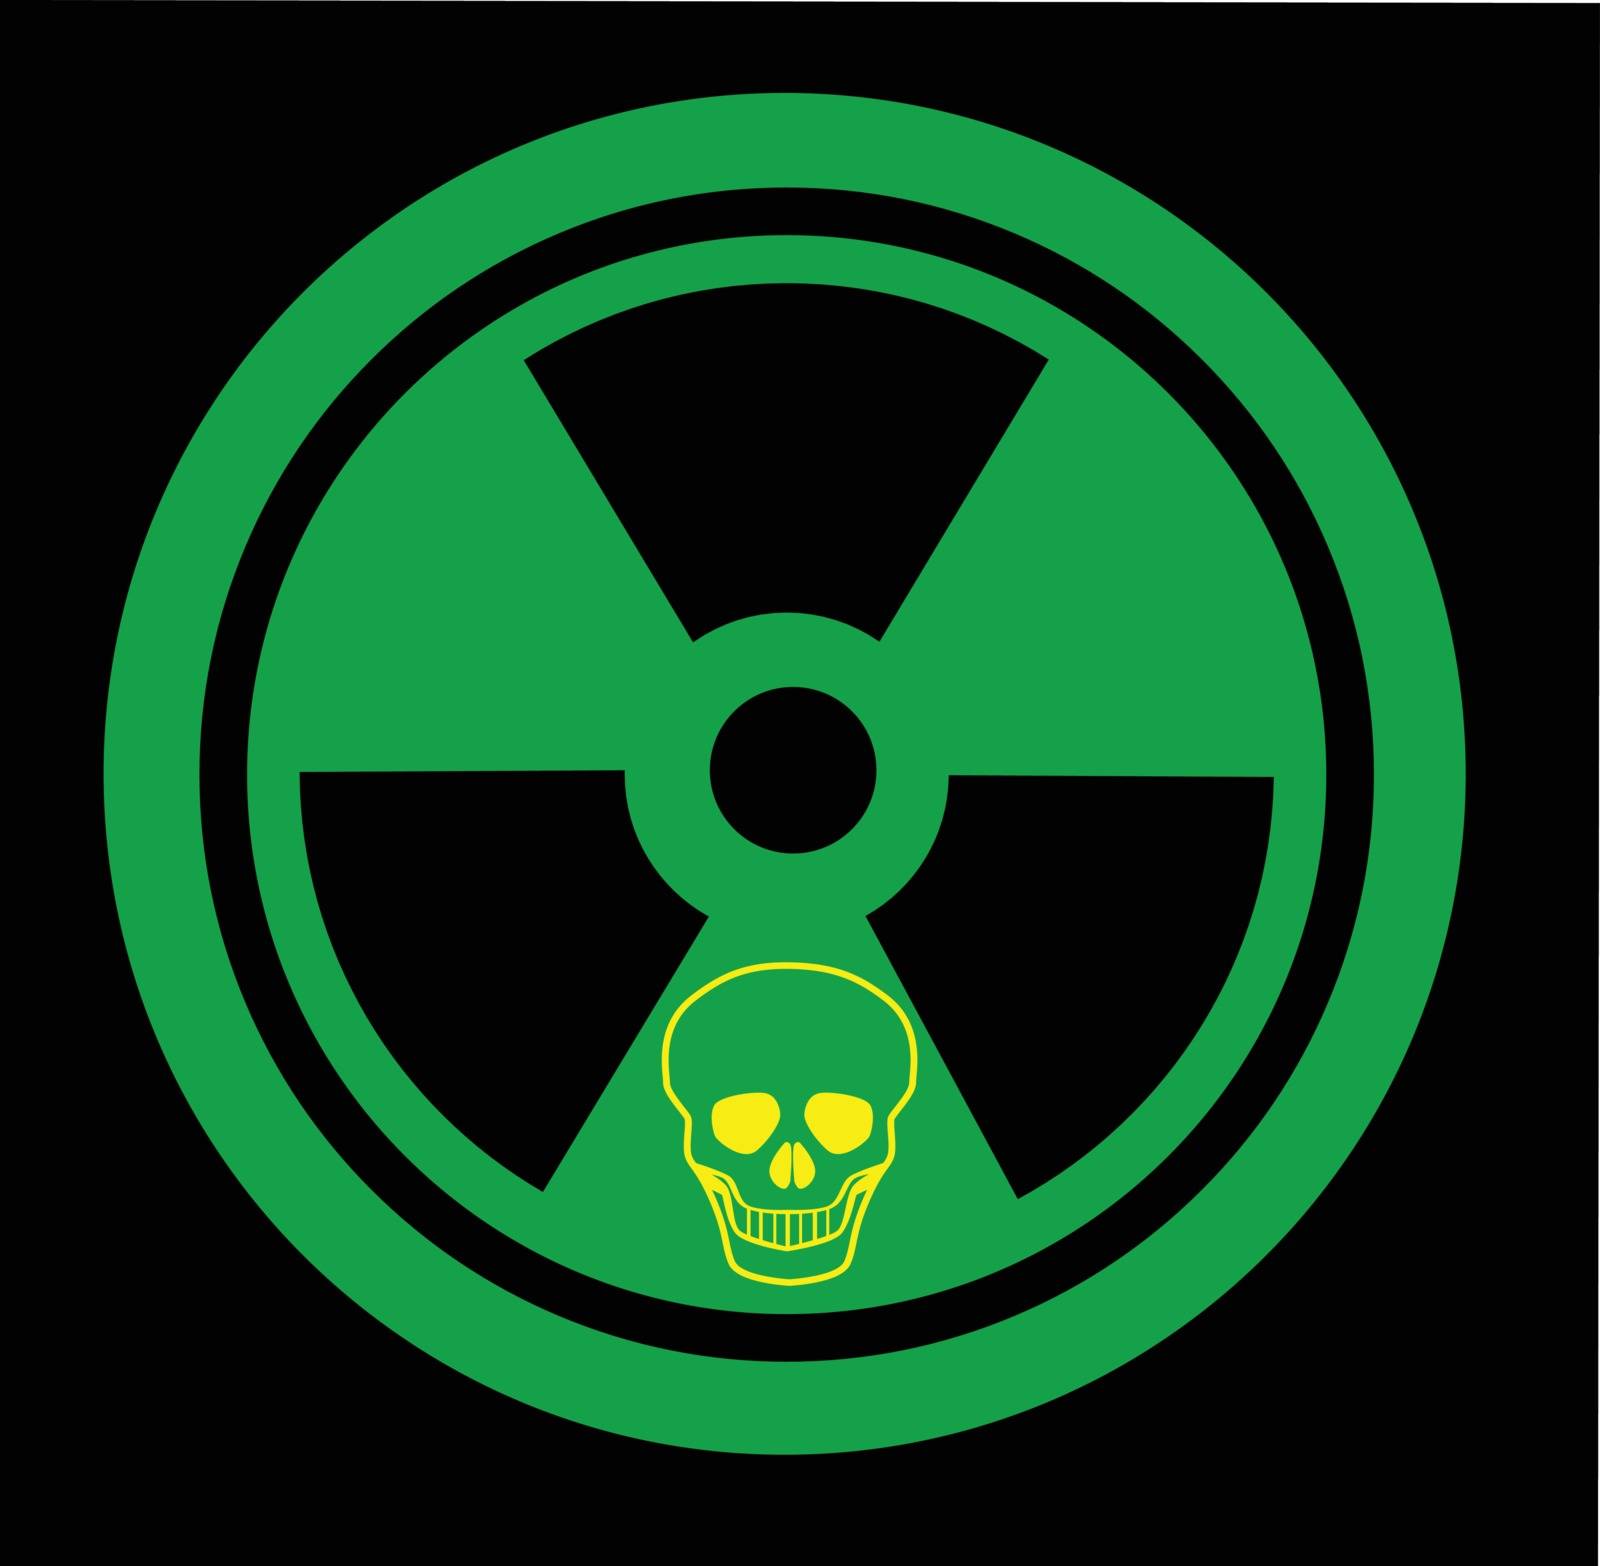 Radiation sign with small skull outline